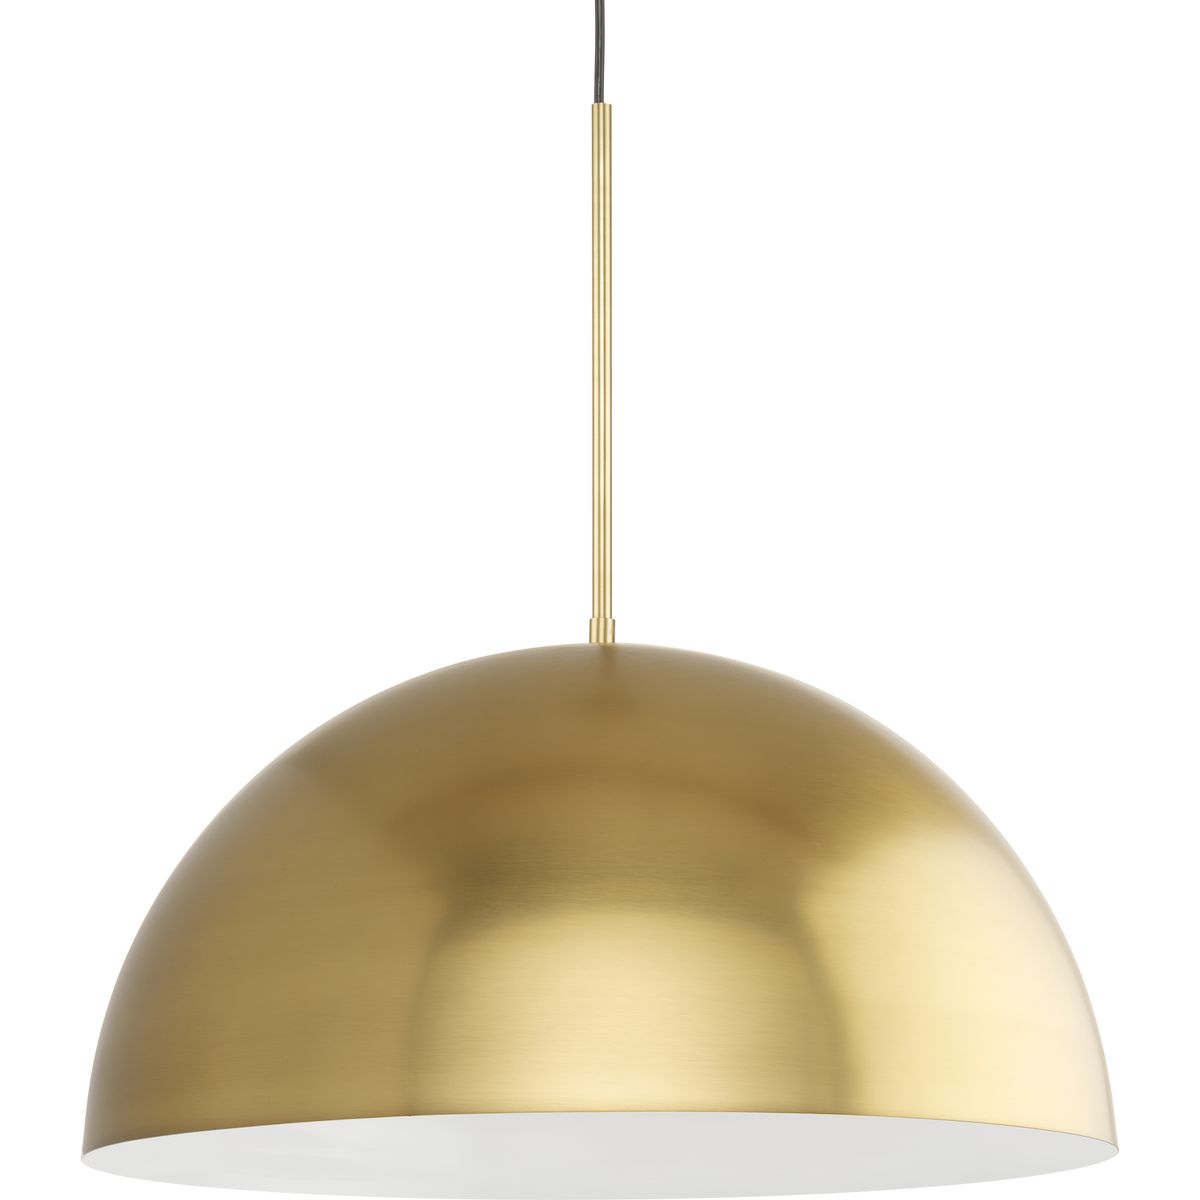 PROGRESS LIGHTING P500380-191 Brushed Gold Perimeter Collection One-Light Brushed Gold Mid-Century Modern Pendant with metal Shade